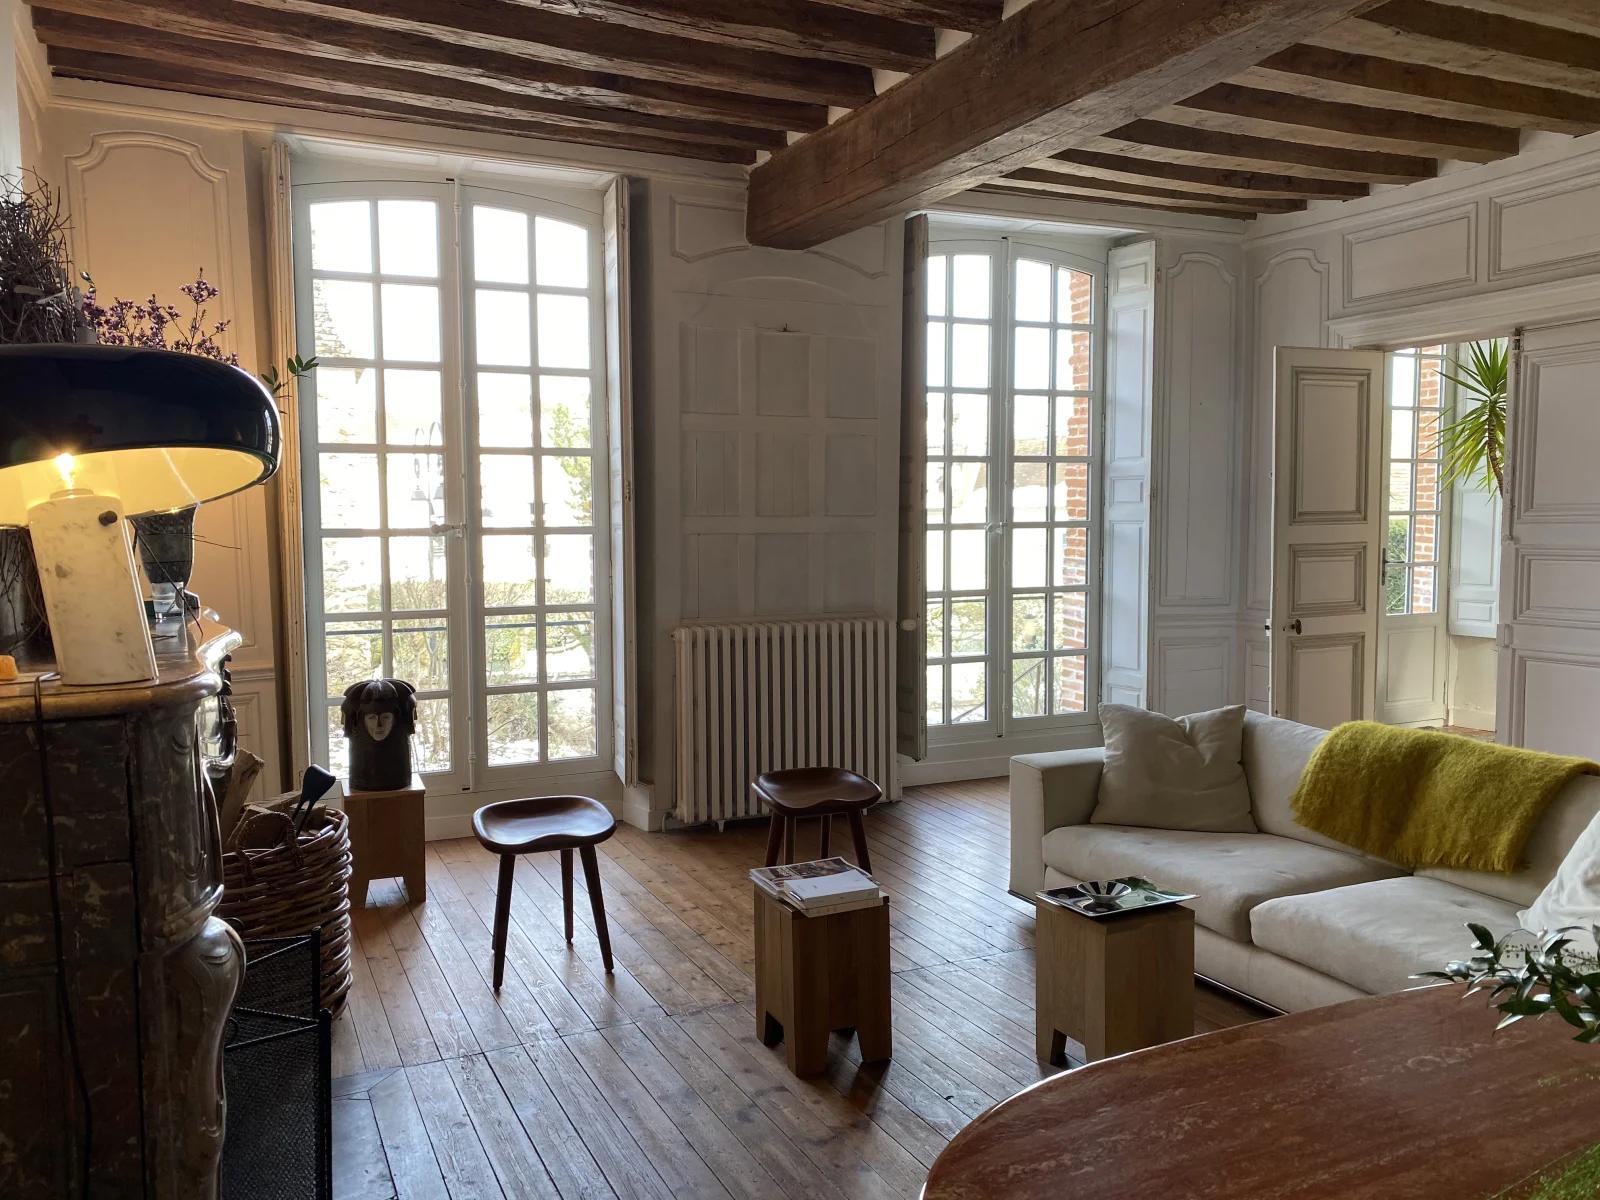 Space A magnificent 18th-century house 40km from Paris - 1